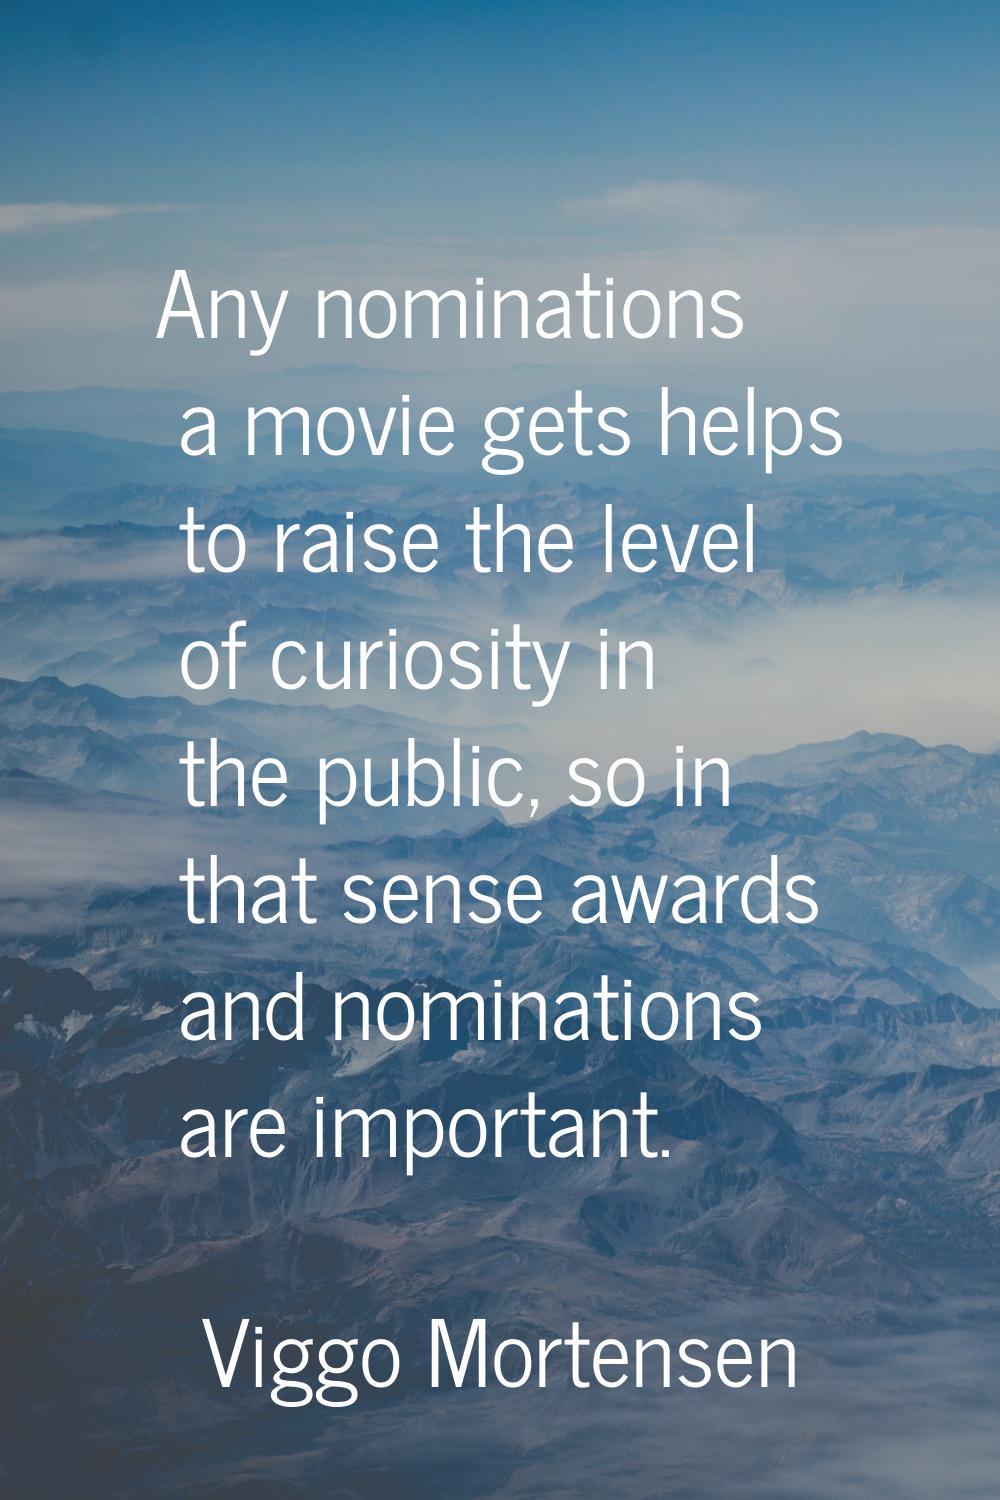 Any nominations a movie gets helps to raise the level of curiosity in the public, so in that sense 